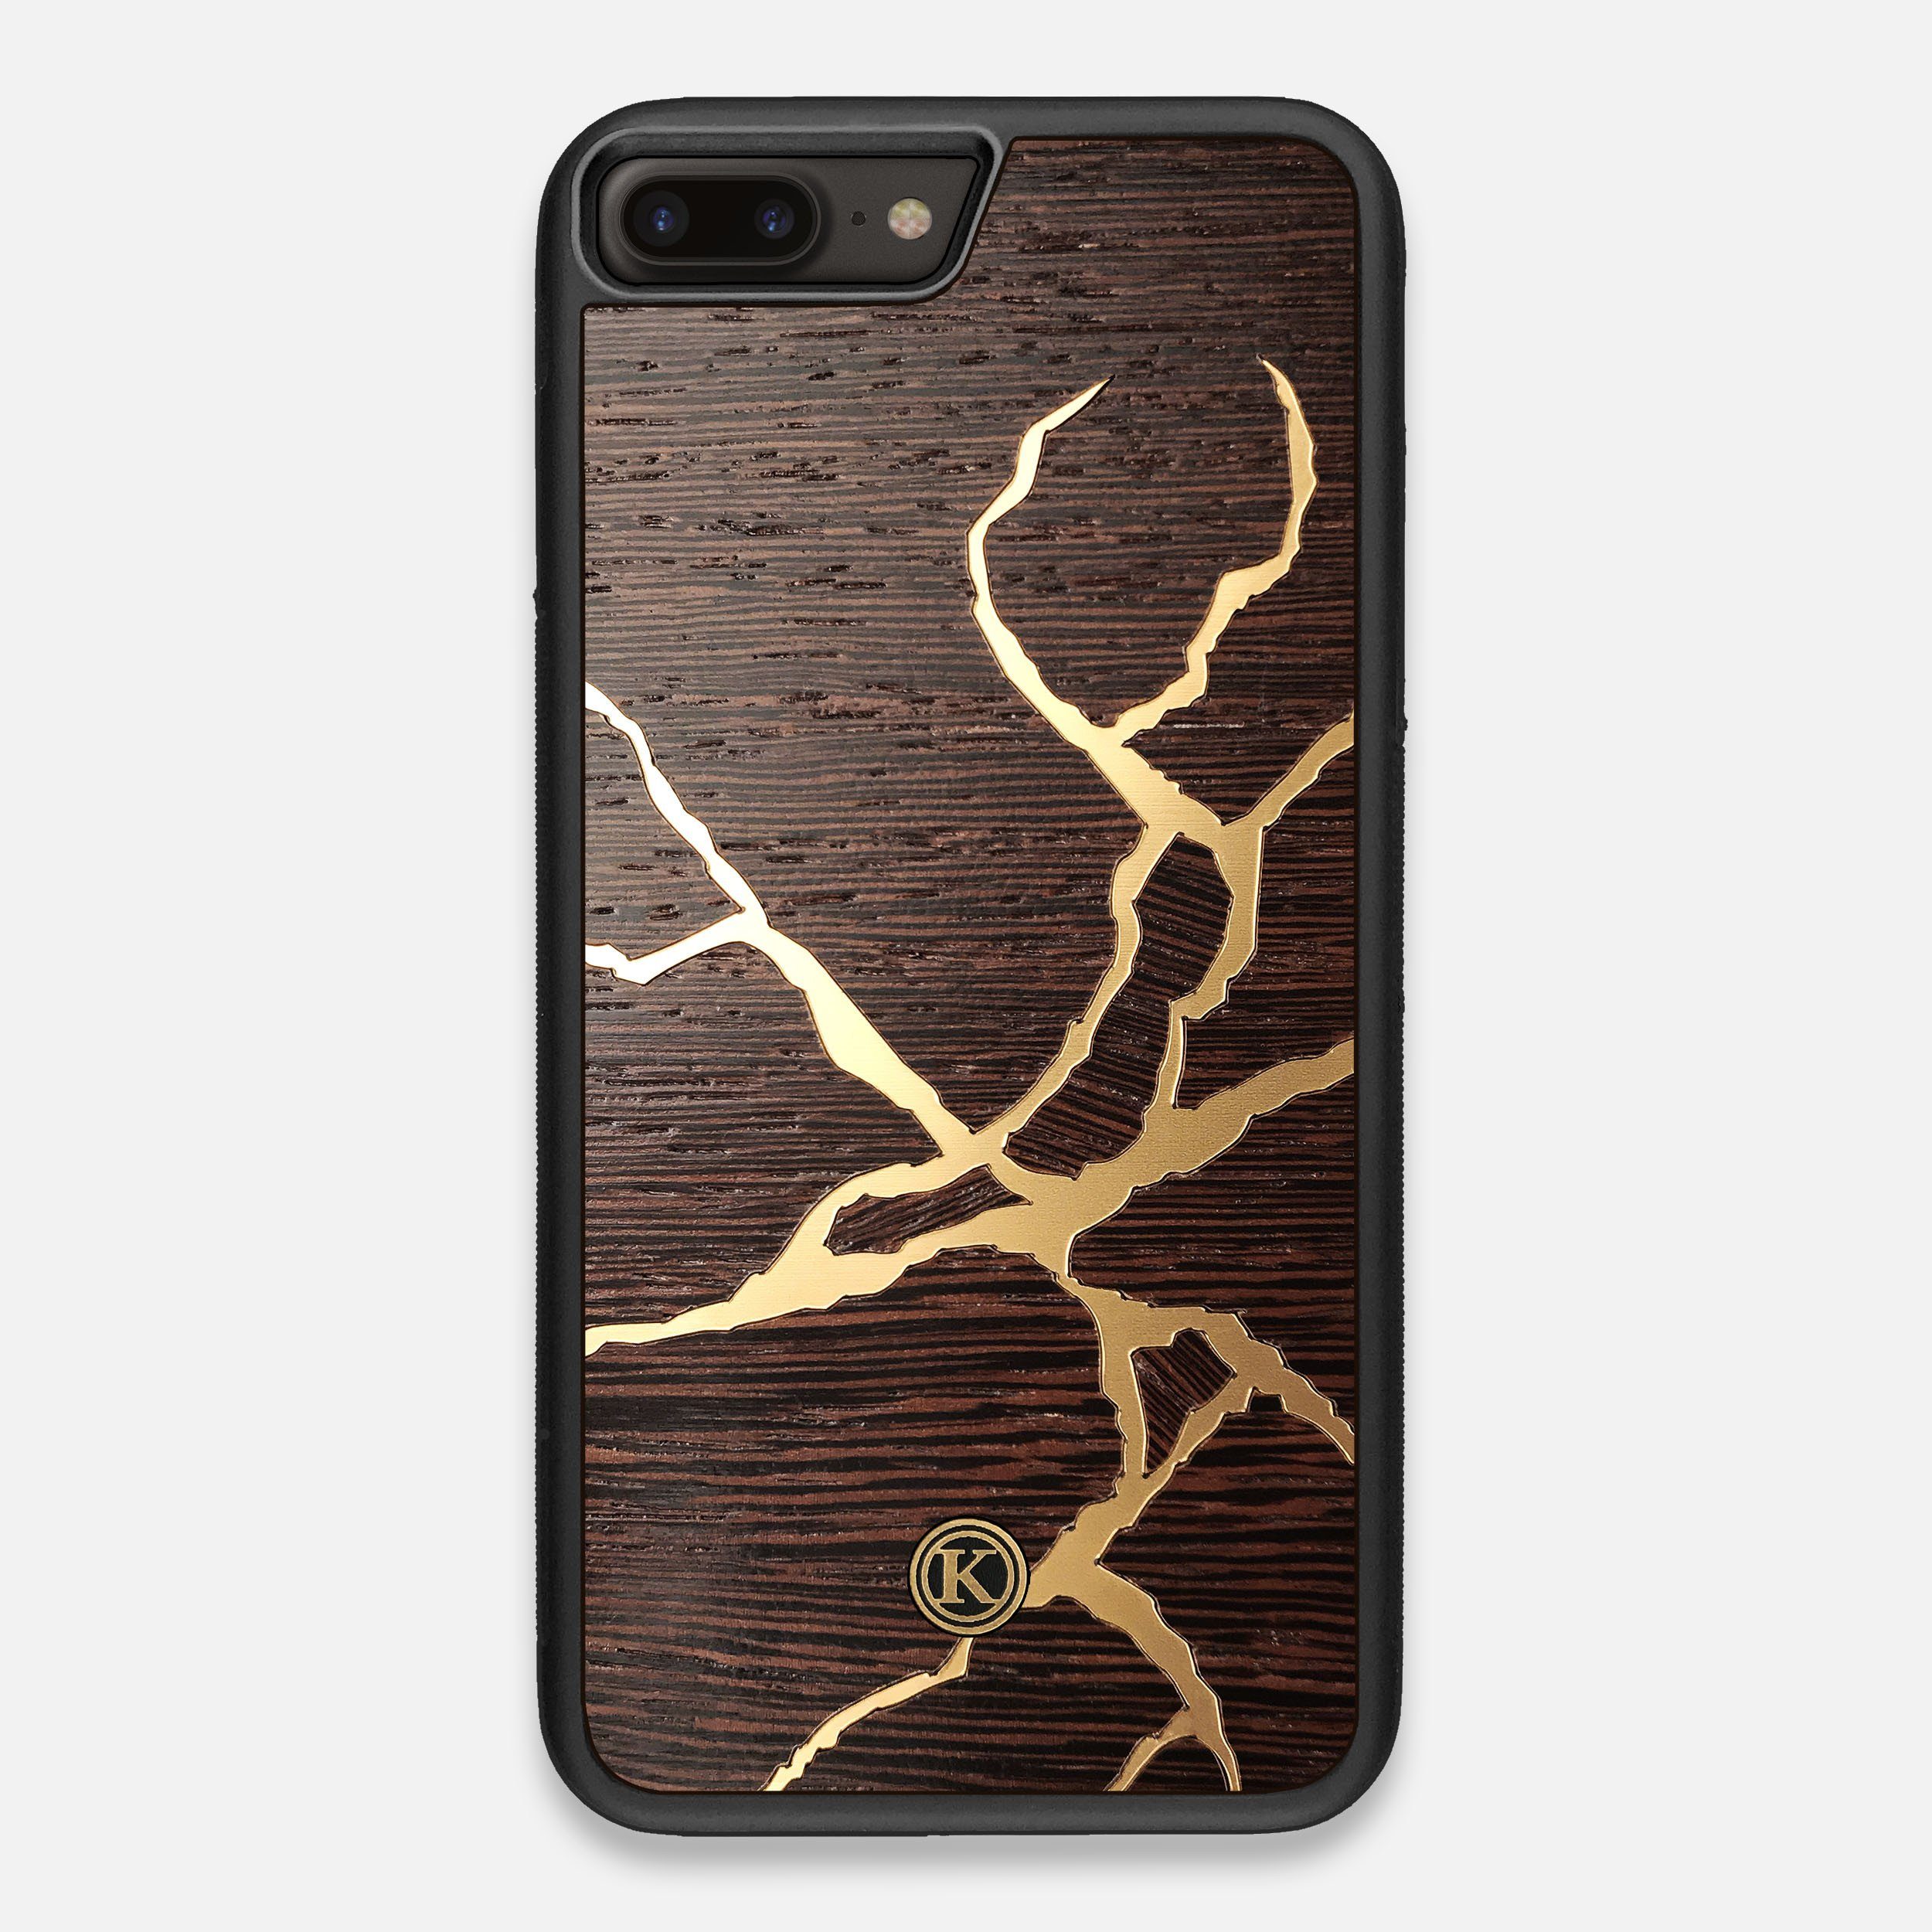 Front view of the Kintsugi inspired Gold and Wenge Wood iPhone 7/8 Plus Case by Keyway Designs